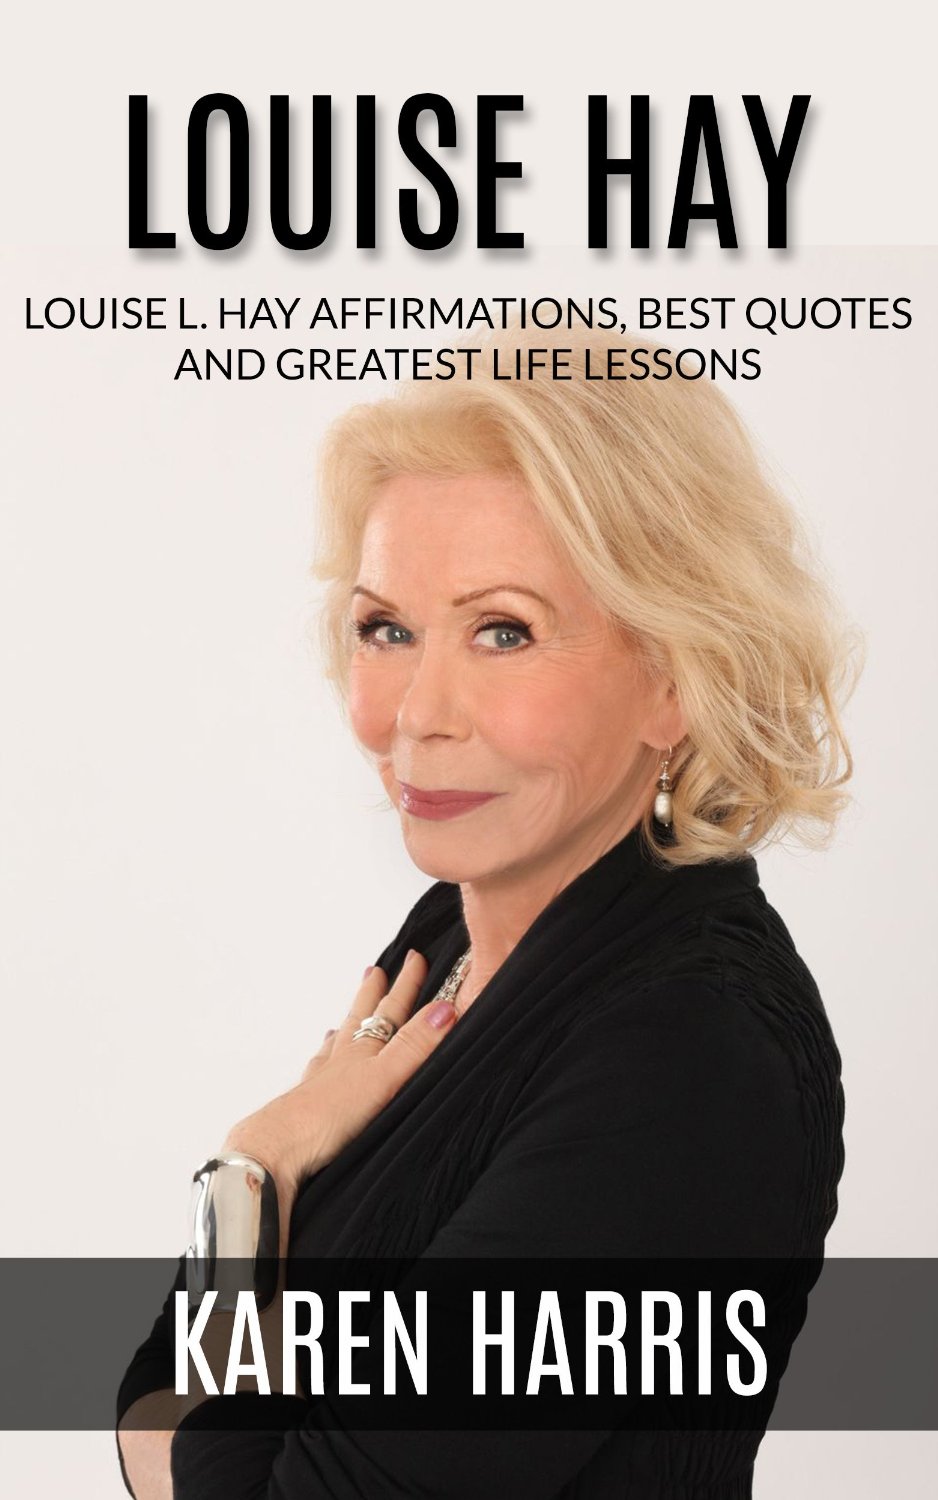 FREE: Louise Hay: Louise Hay Greatest Life Lessons, Best Quotes and Affirmations by Karen Harris